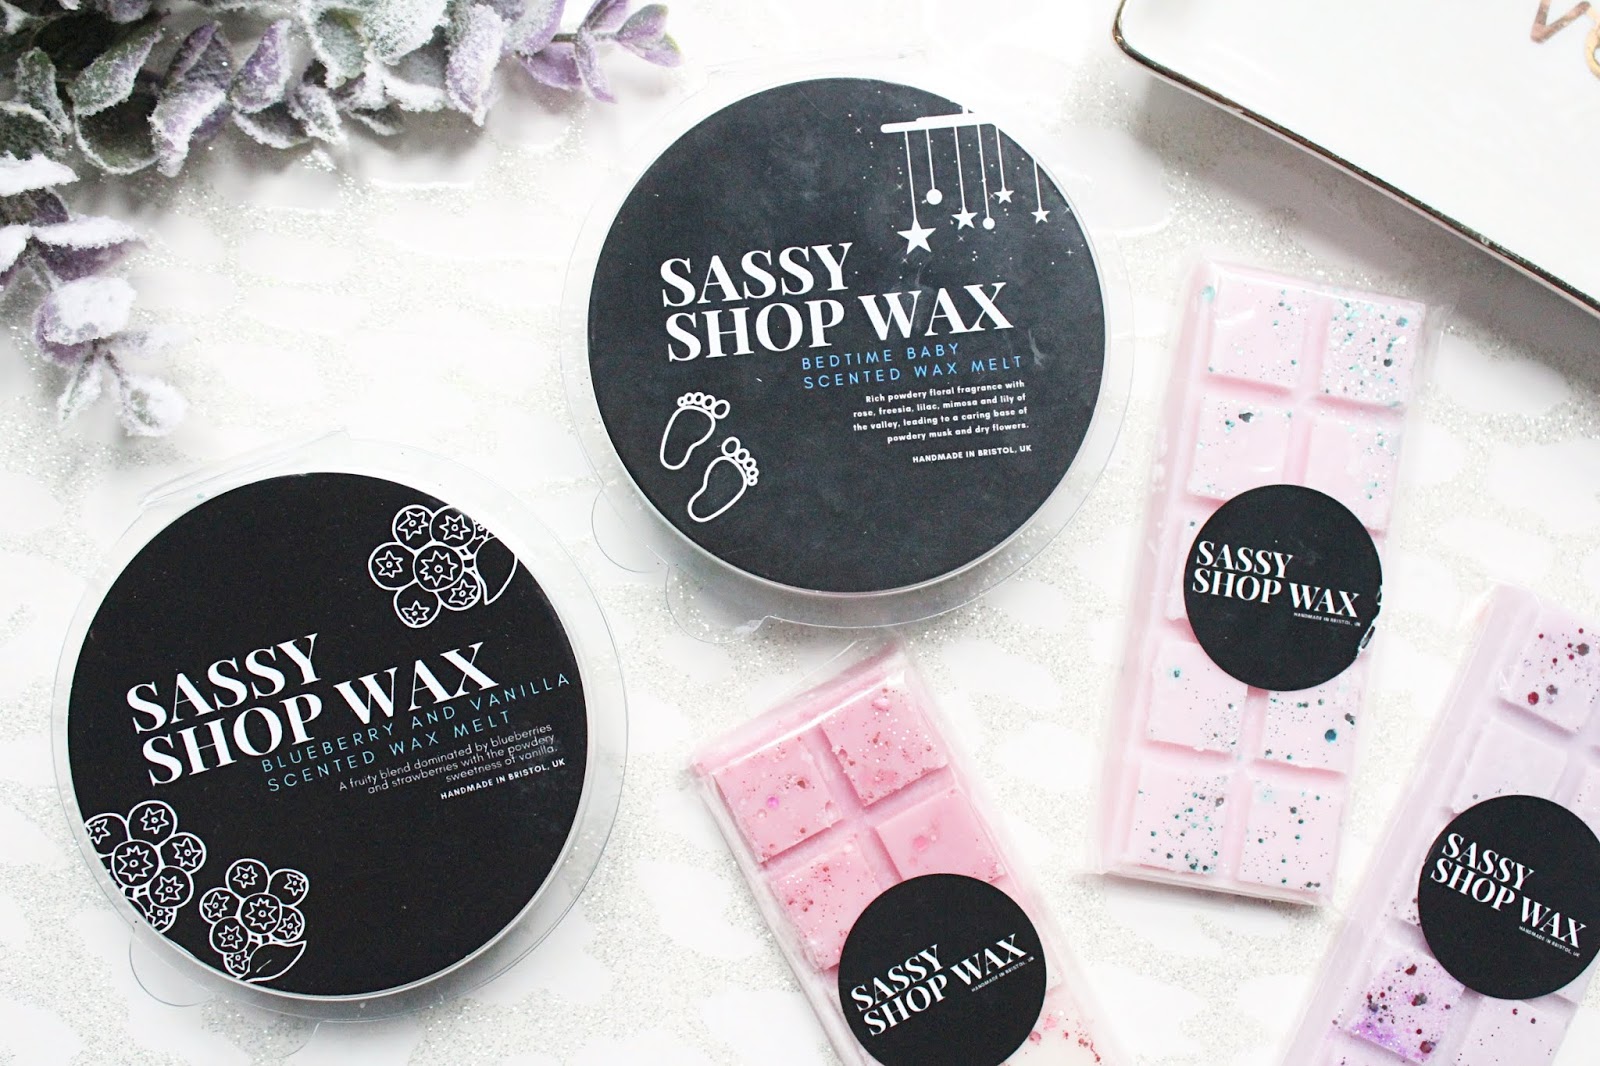 Sassy Shop Wax Must Have Scents